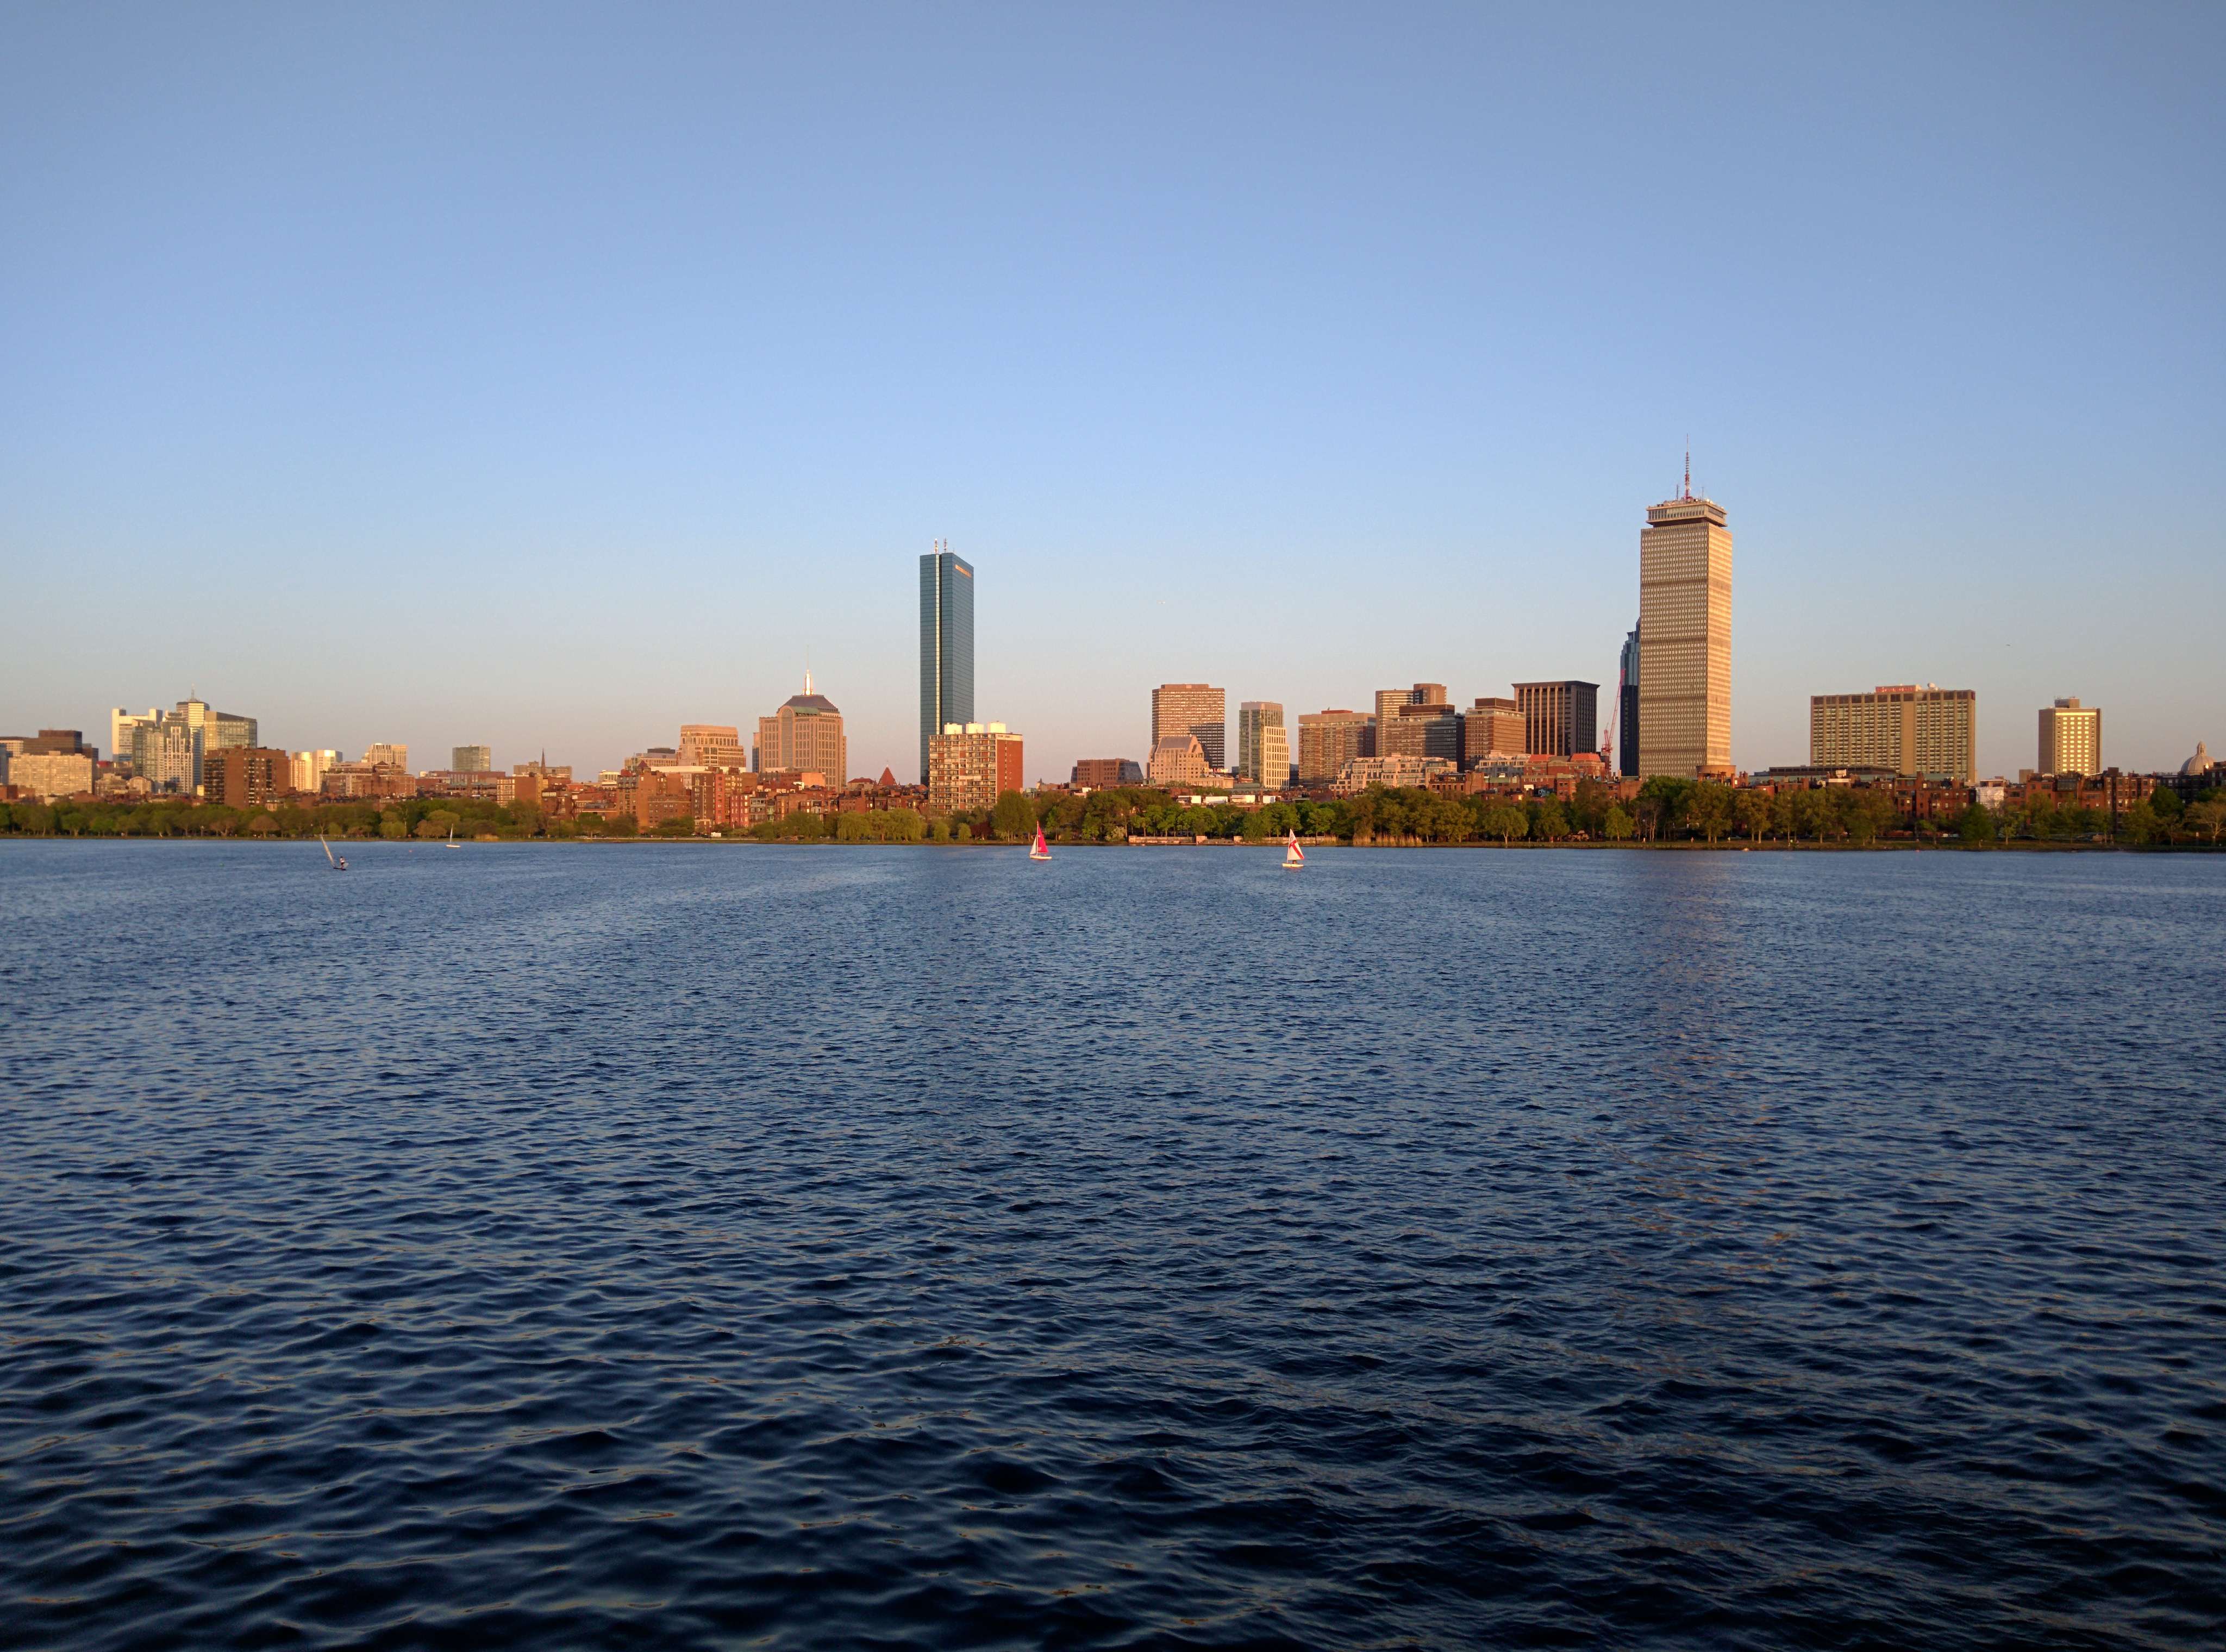 View of Charles River